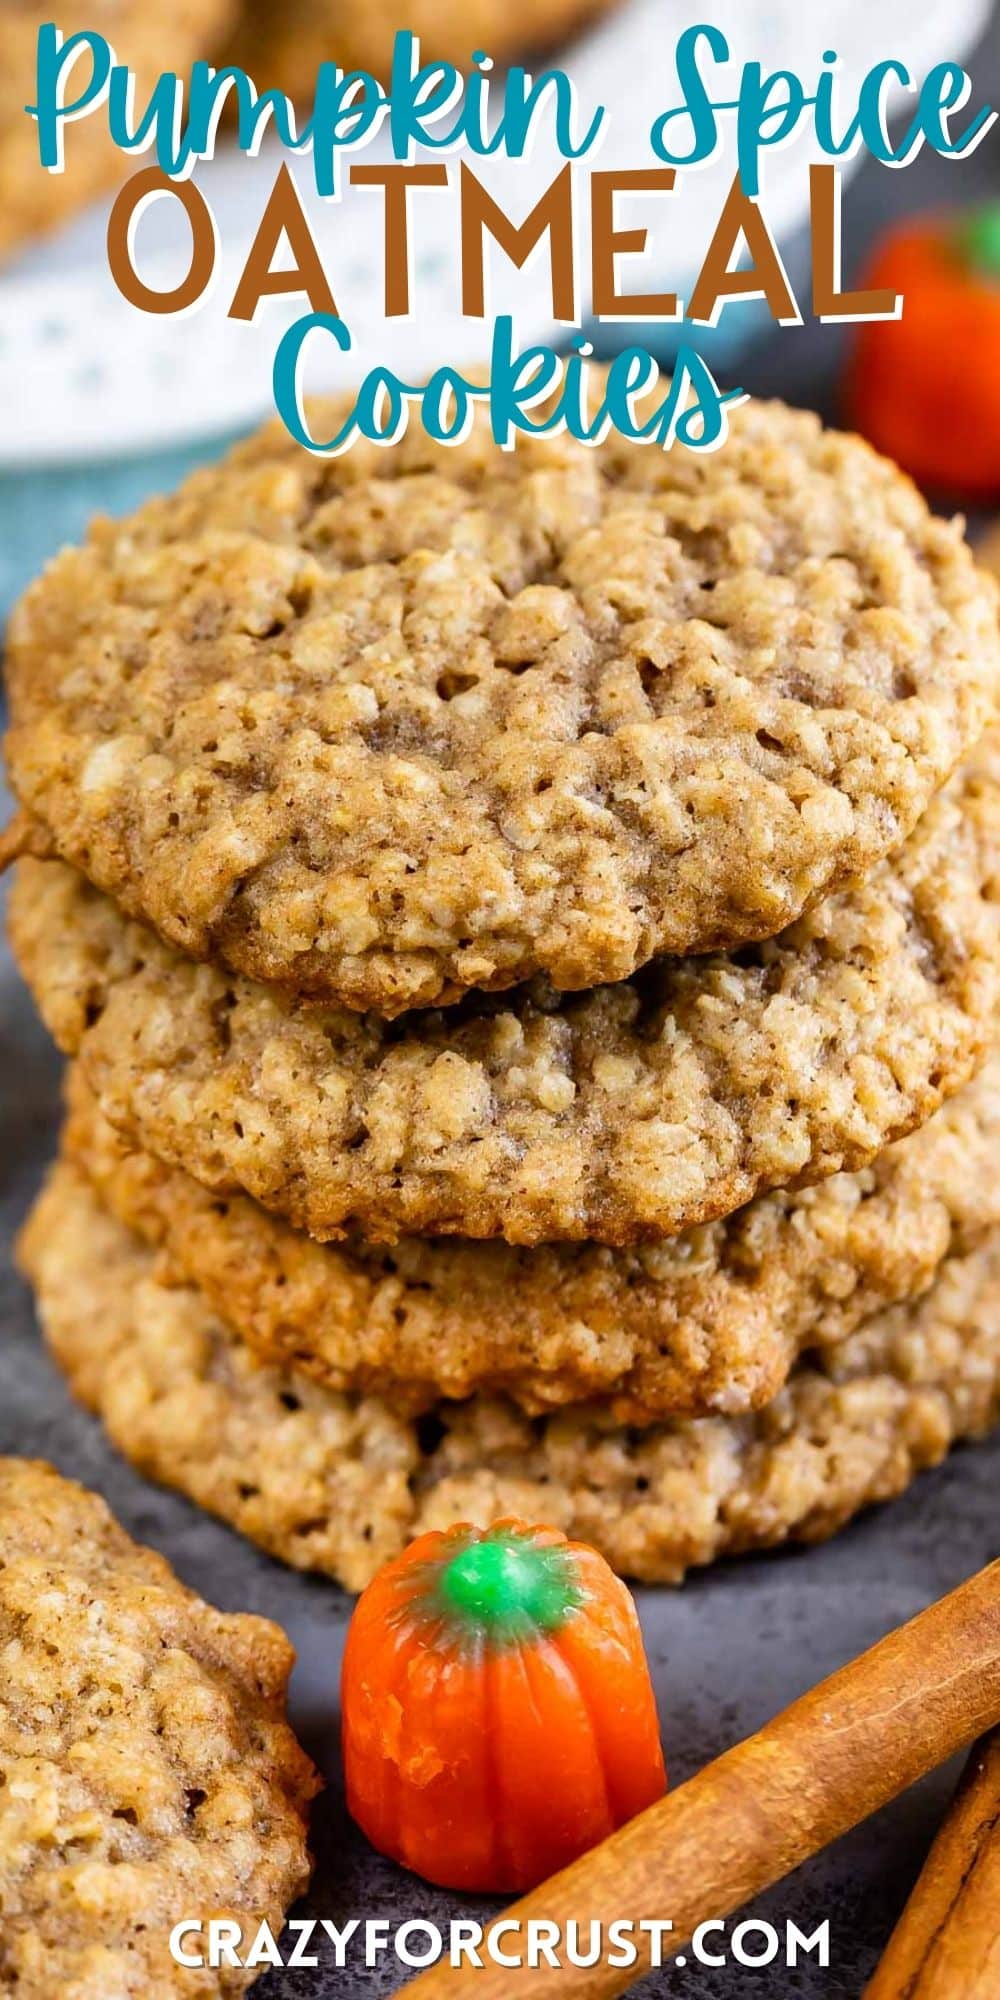 stacked oatmeal cookies with candy pumpkin sitting around them with words on the image.